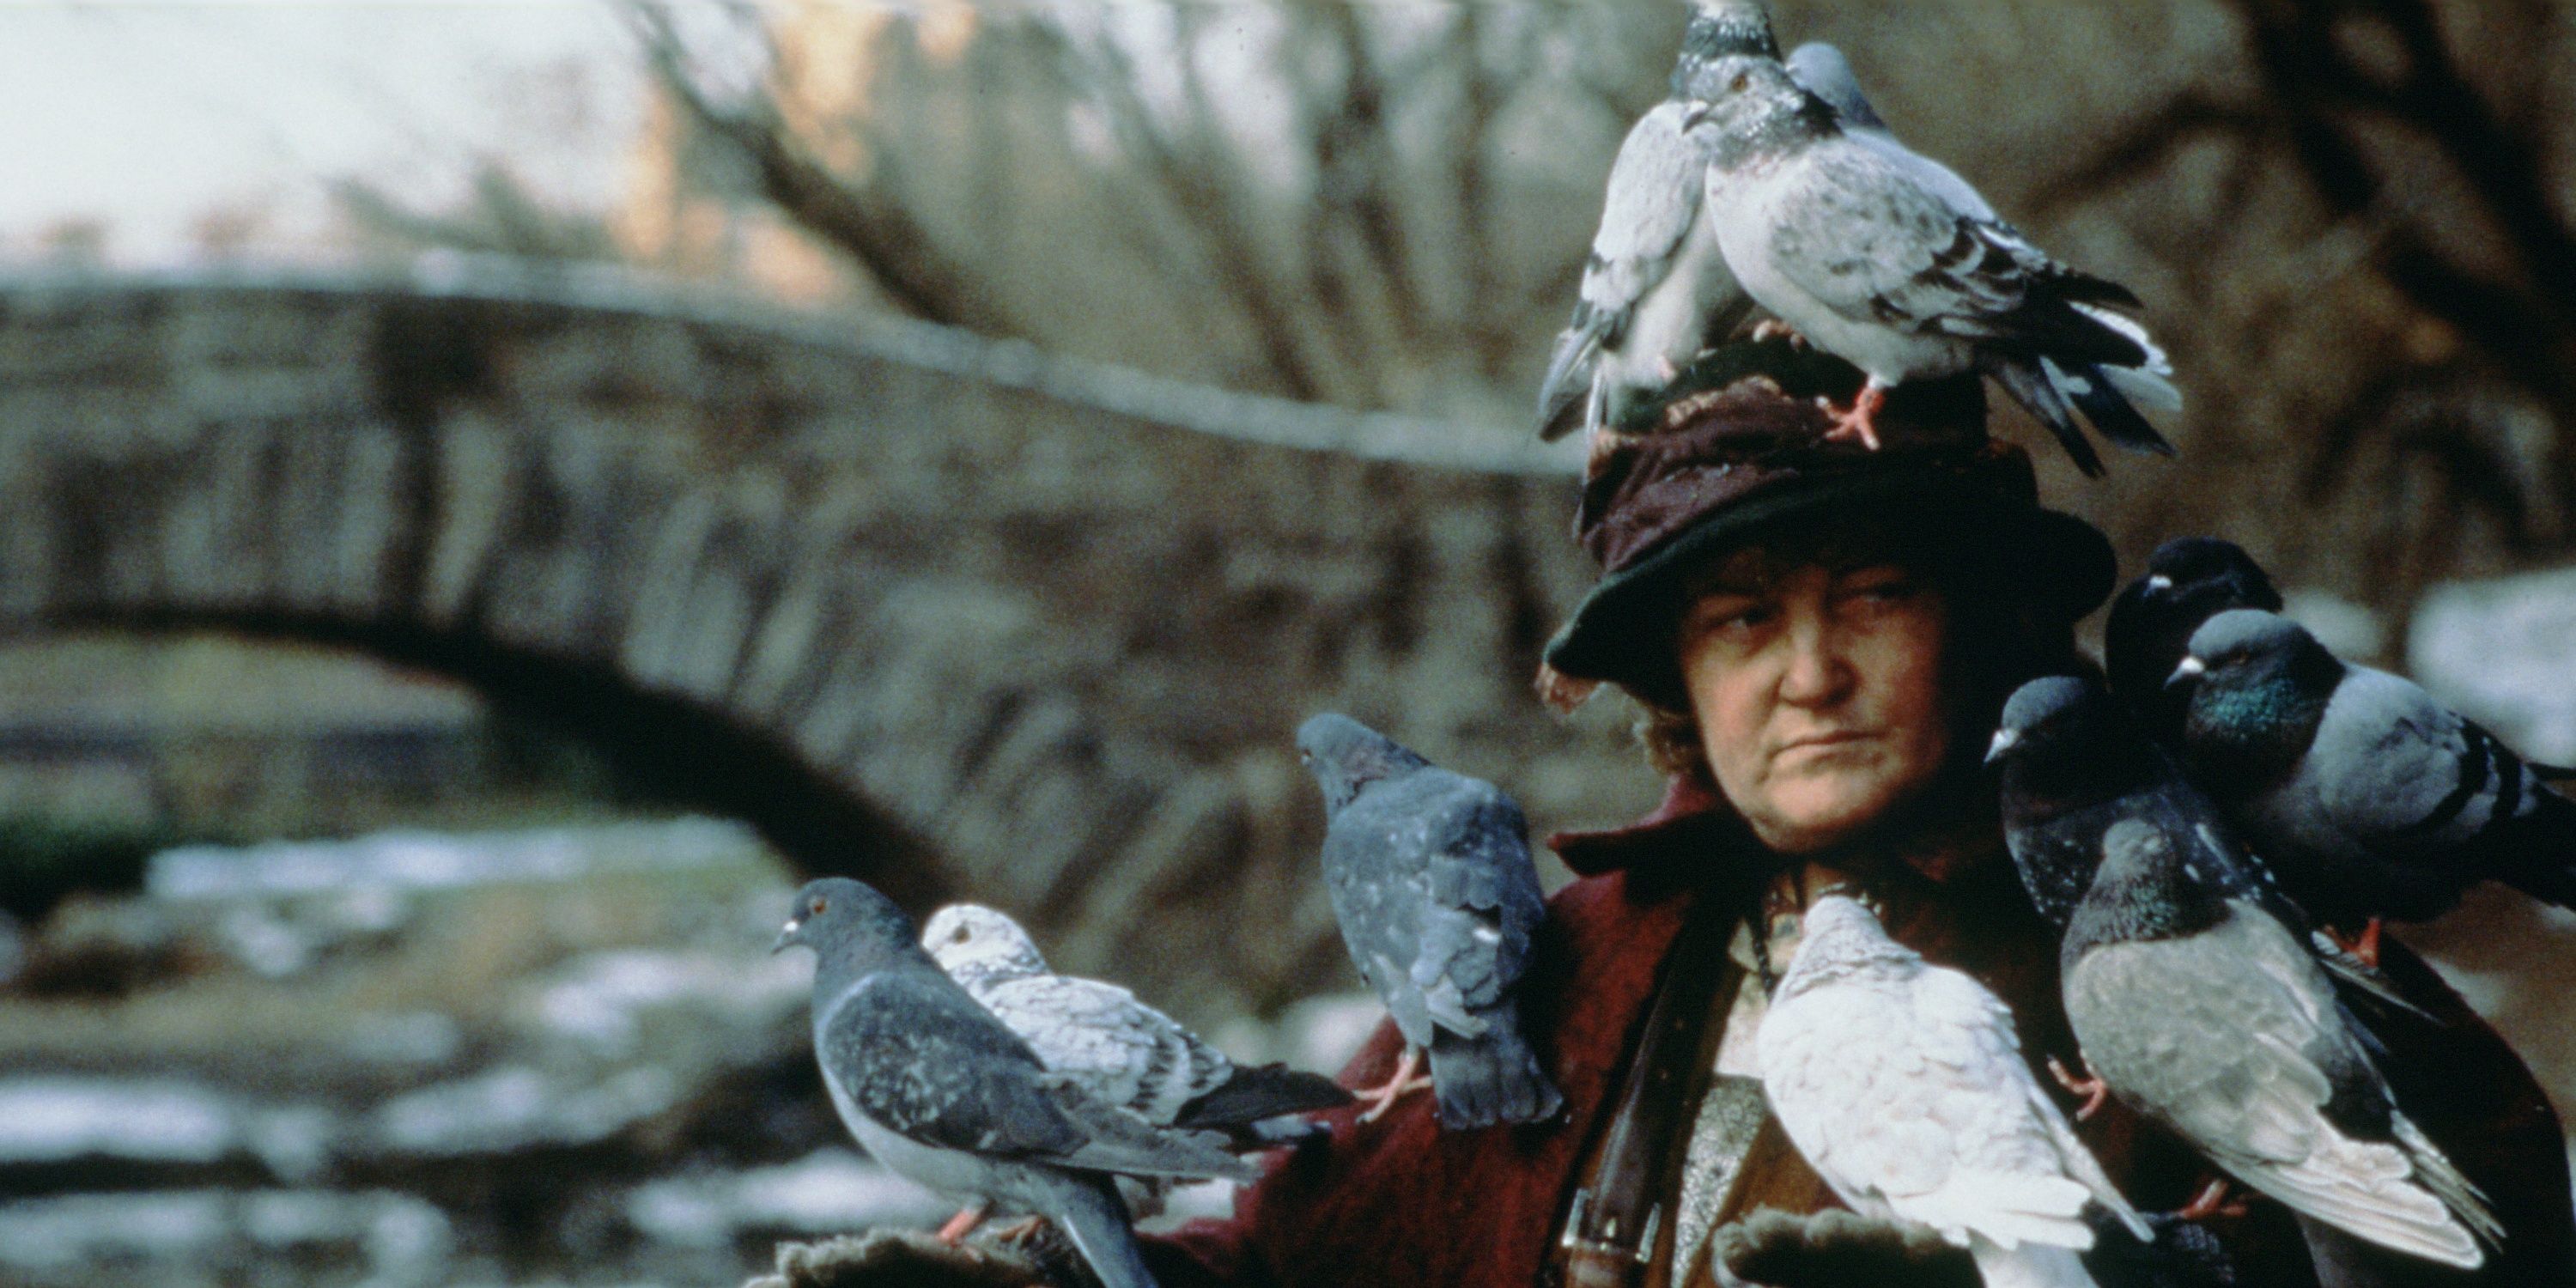 Pigeon Lady in Central Park